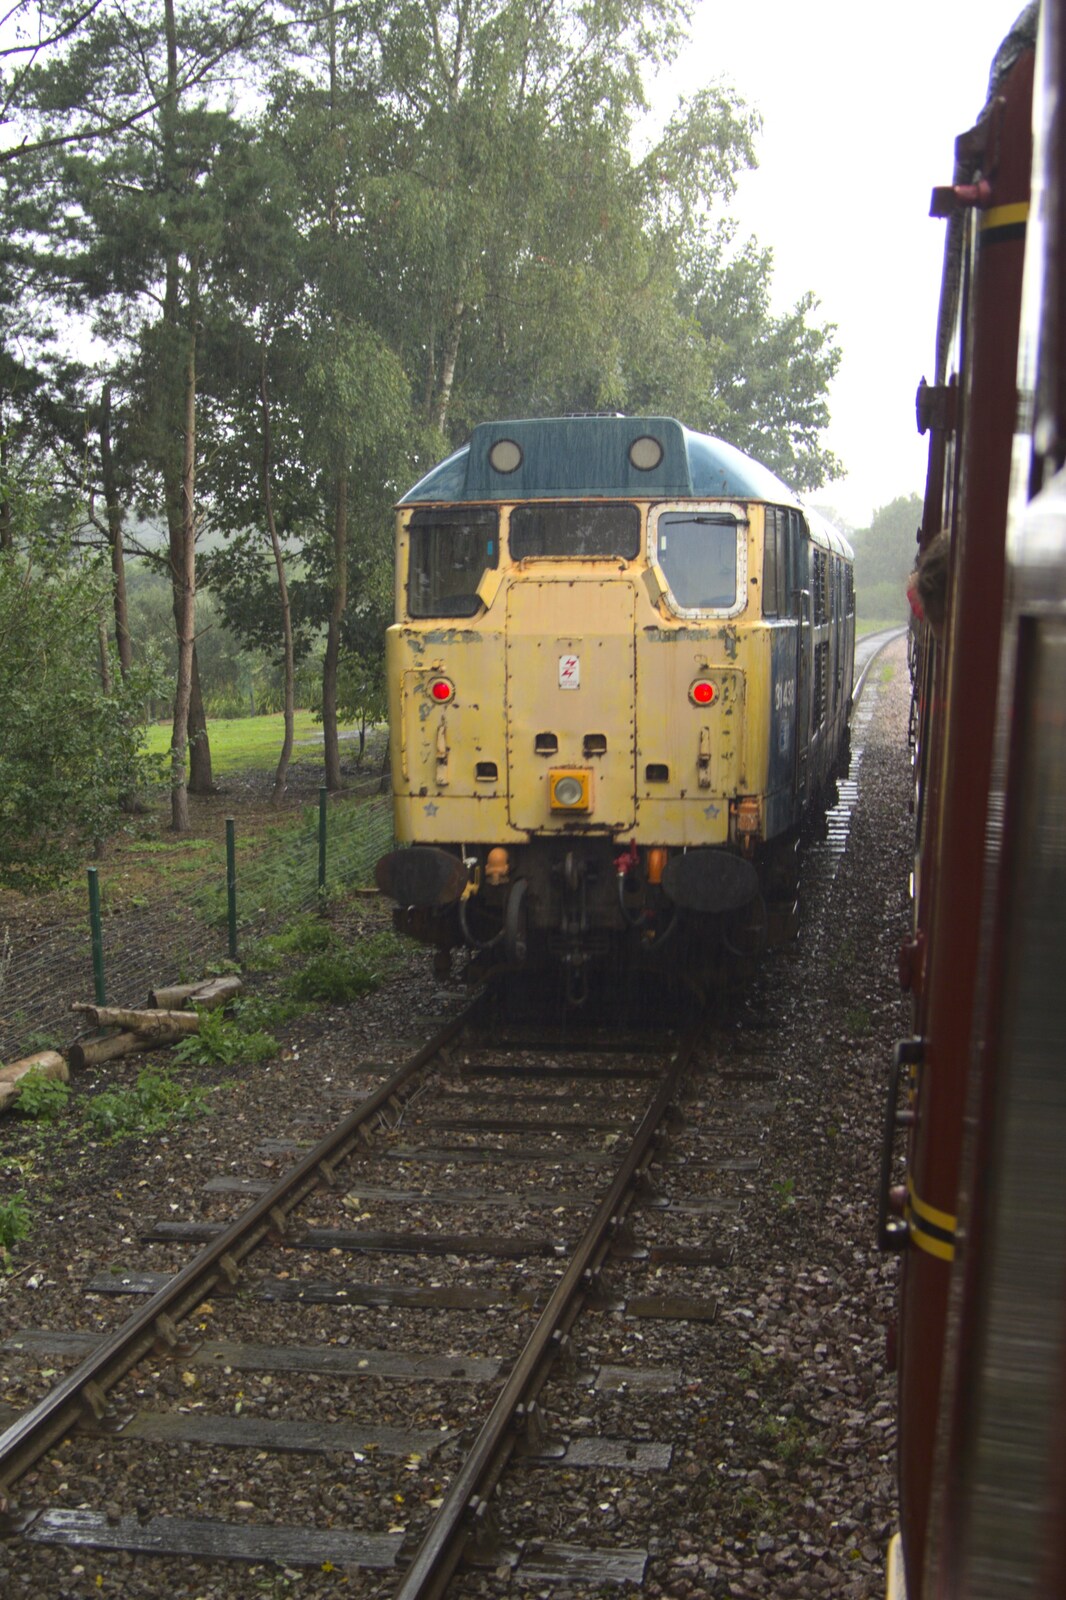 Camping with Trains, Yaxham, Norfolk - 29th August 2010: The Class 31 rumbles down the line